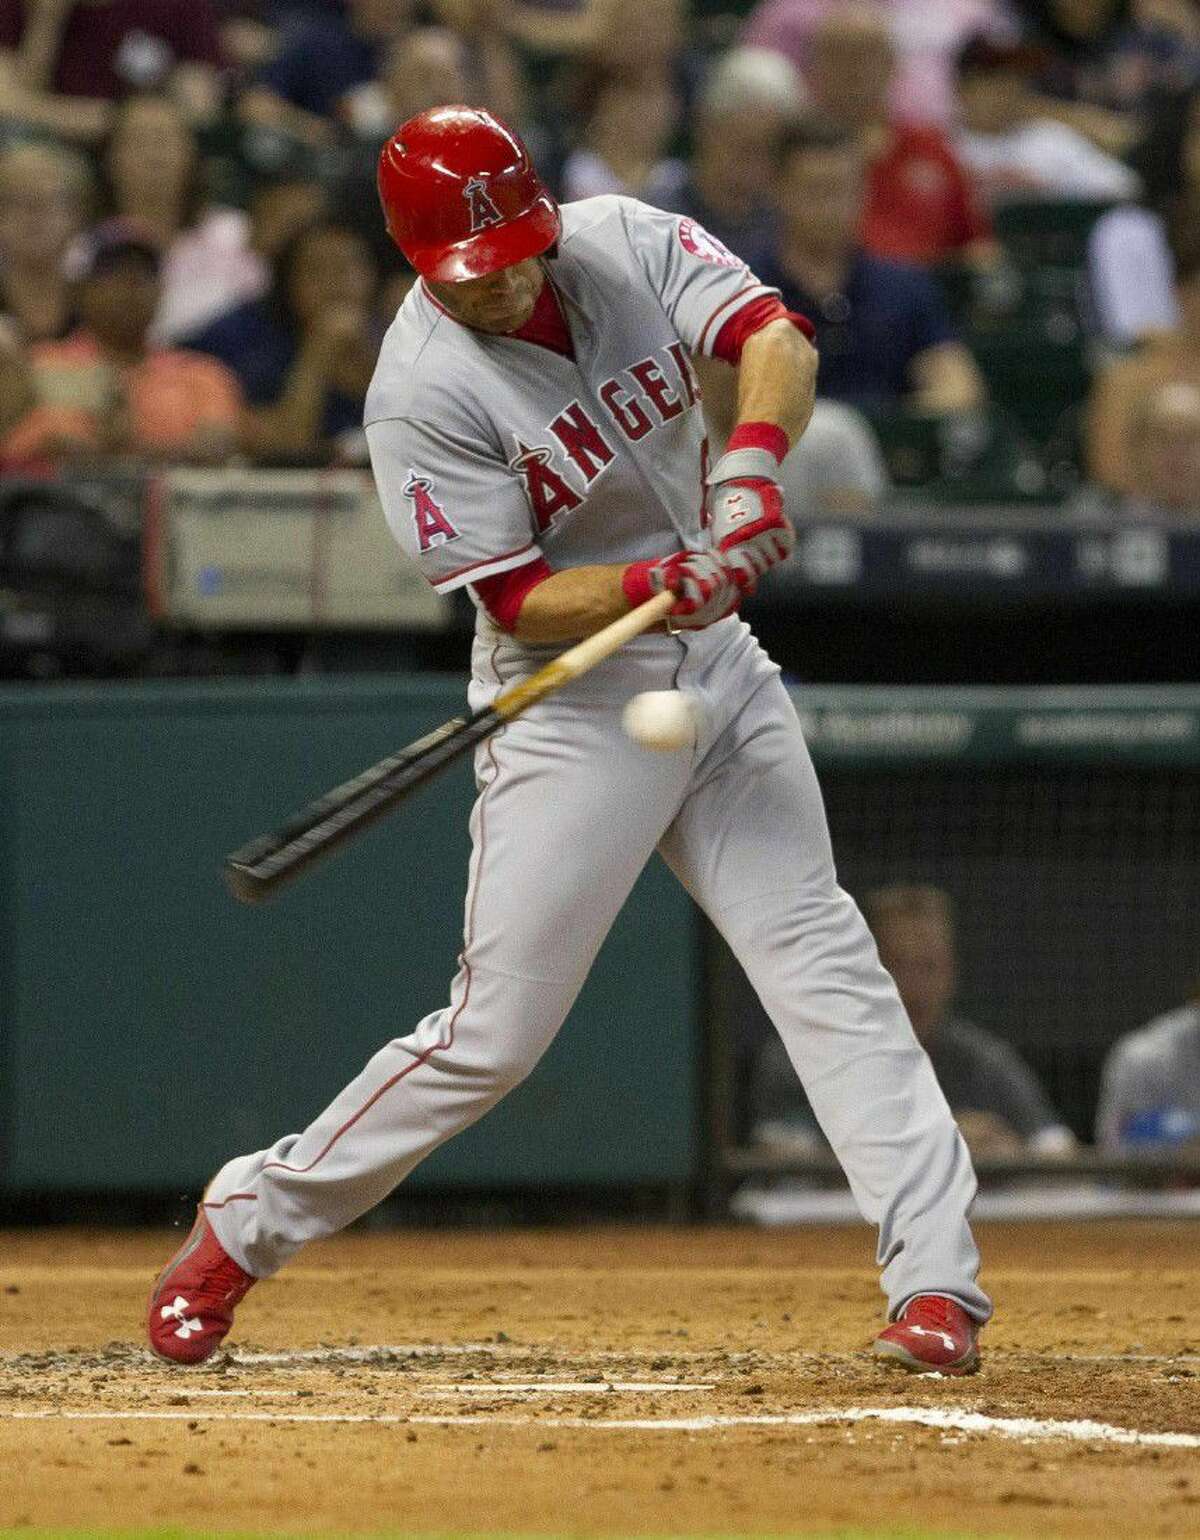 Katy Taylor graduate Taylor Featherston, pictured playing for the Los Angeles Angels in 2015 at Minute Maid Park, has 12 home runs in 85 games at Lehigh Valley, the Philadelphia Phillies' Triple-A affiliate.